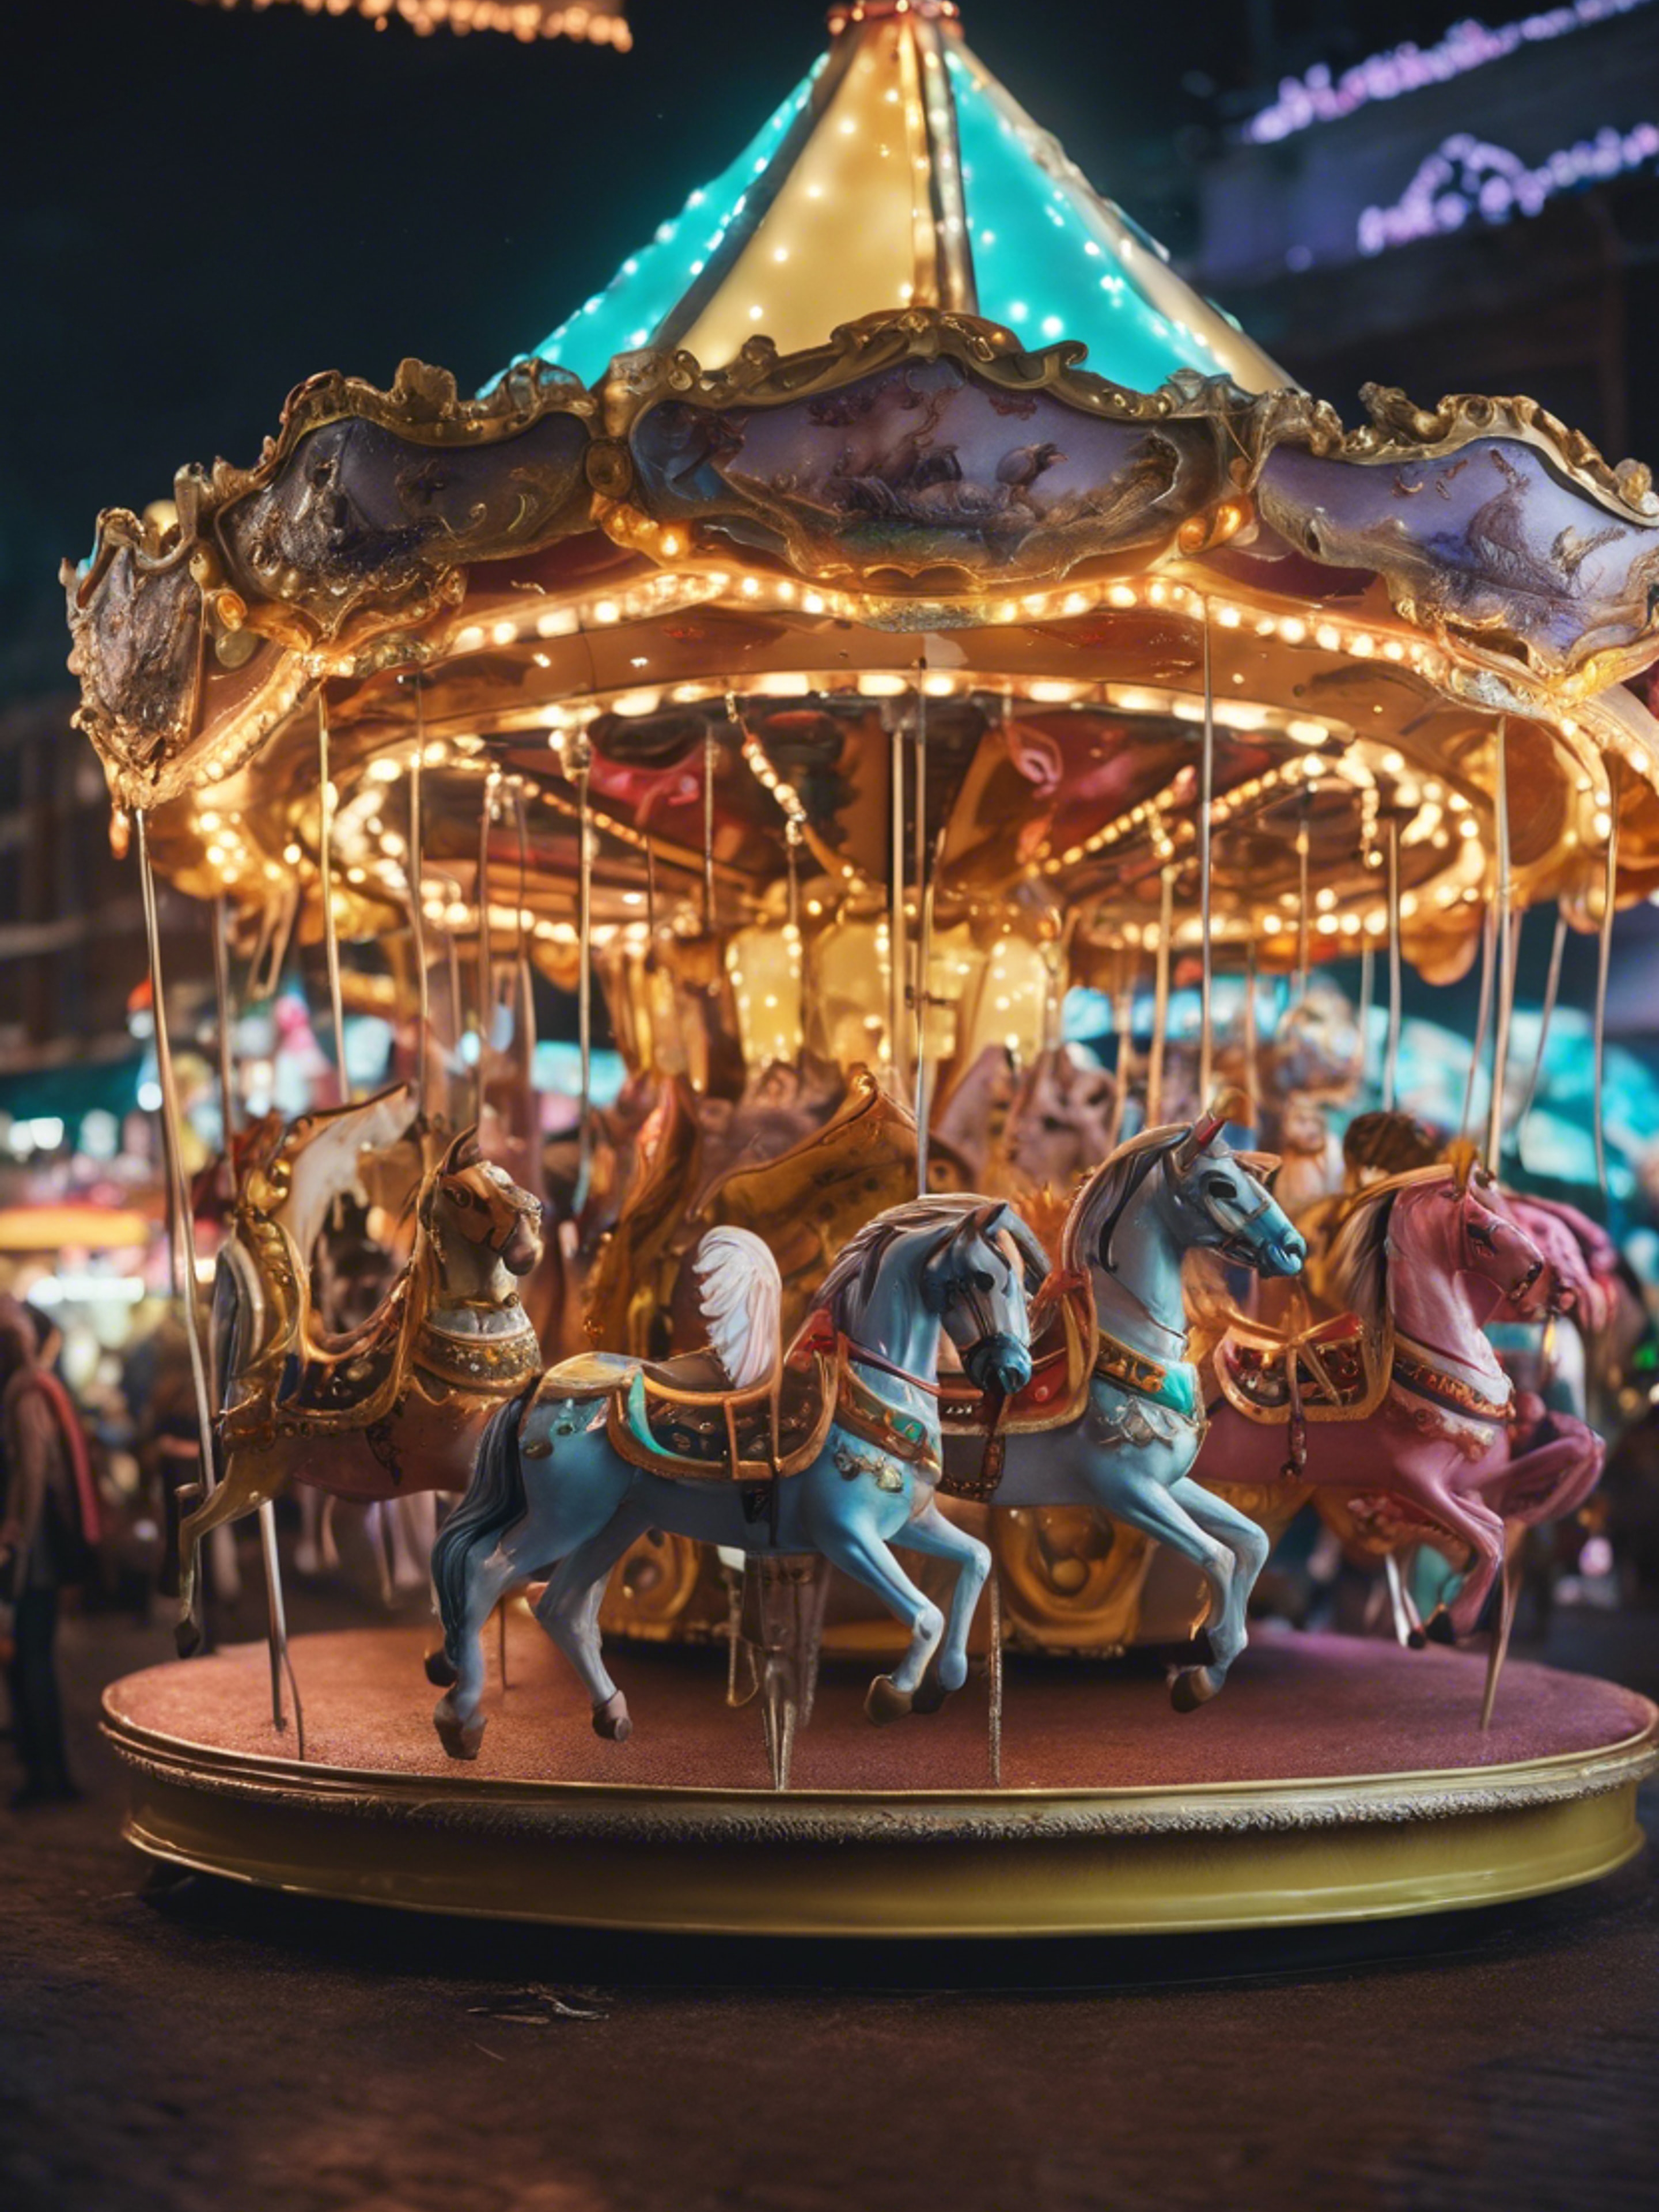 An enchanted carousel with various magical creatures as the seats, nestled in a festive carnival beneath a shower of neon stardust. Wallpaper[c01a4d9e6e424363abf7]